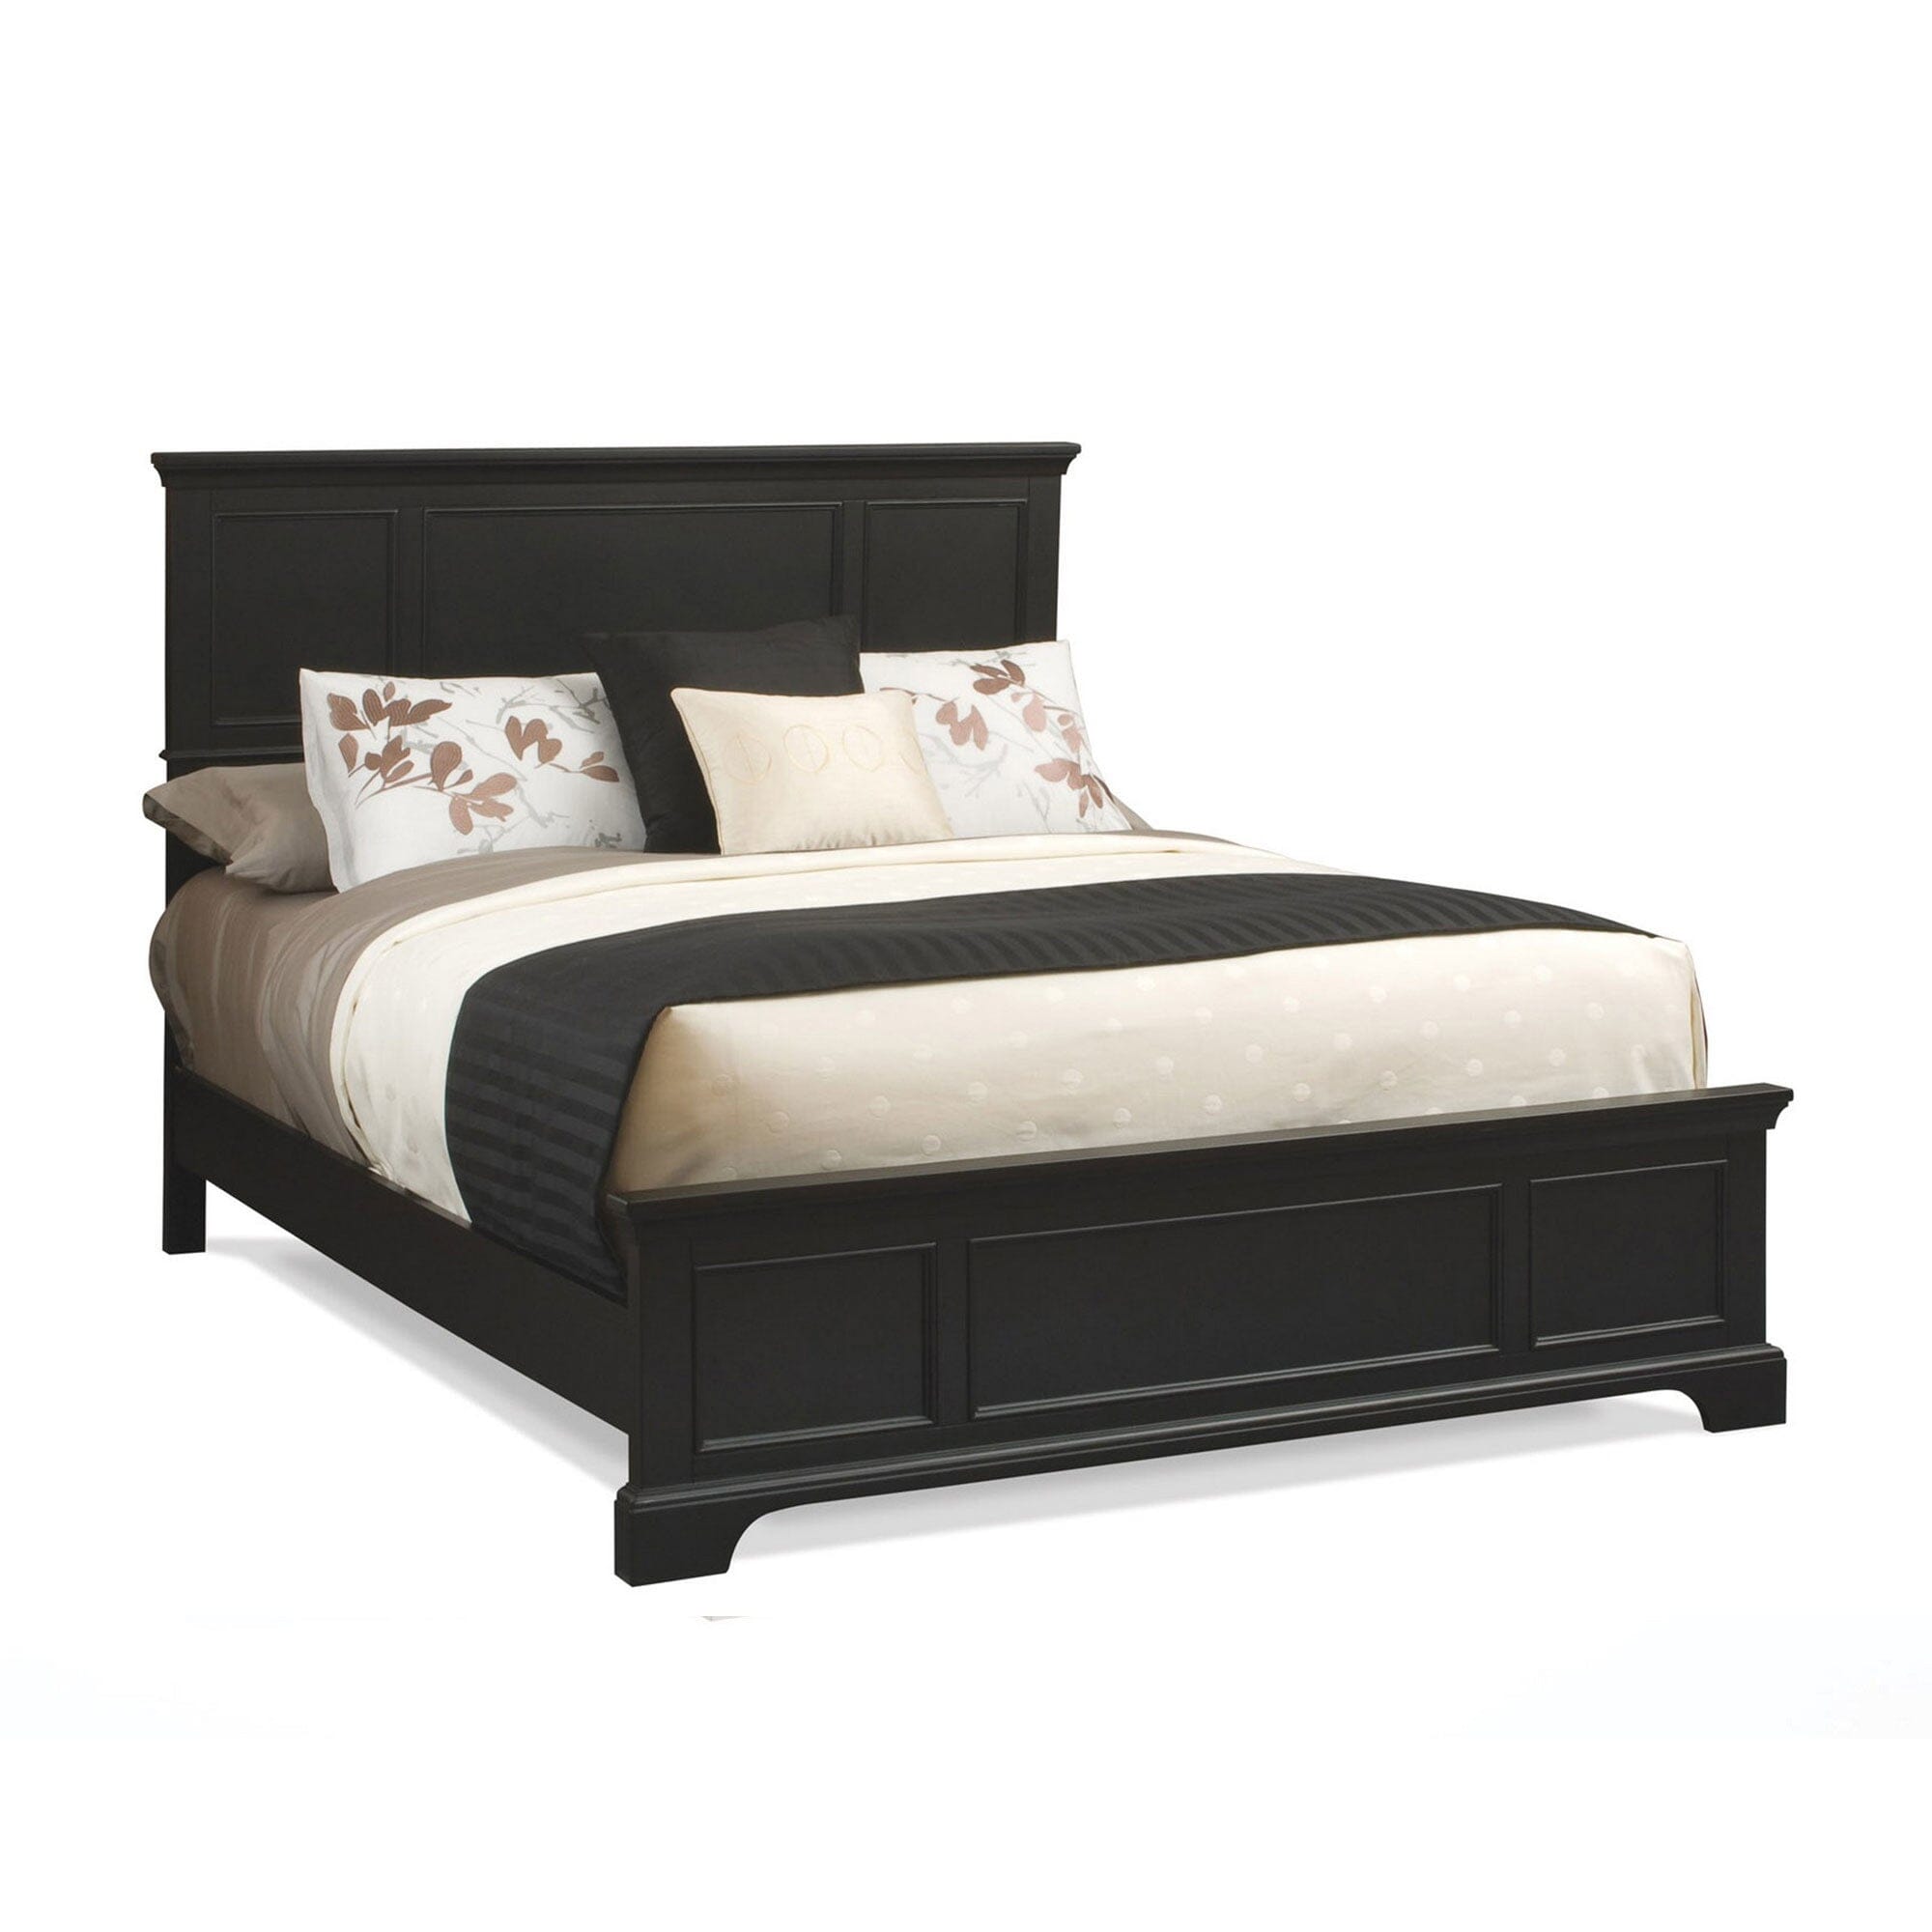 Traditional Queen Bed By Bedford Queen Bed Bedford